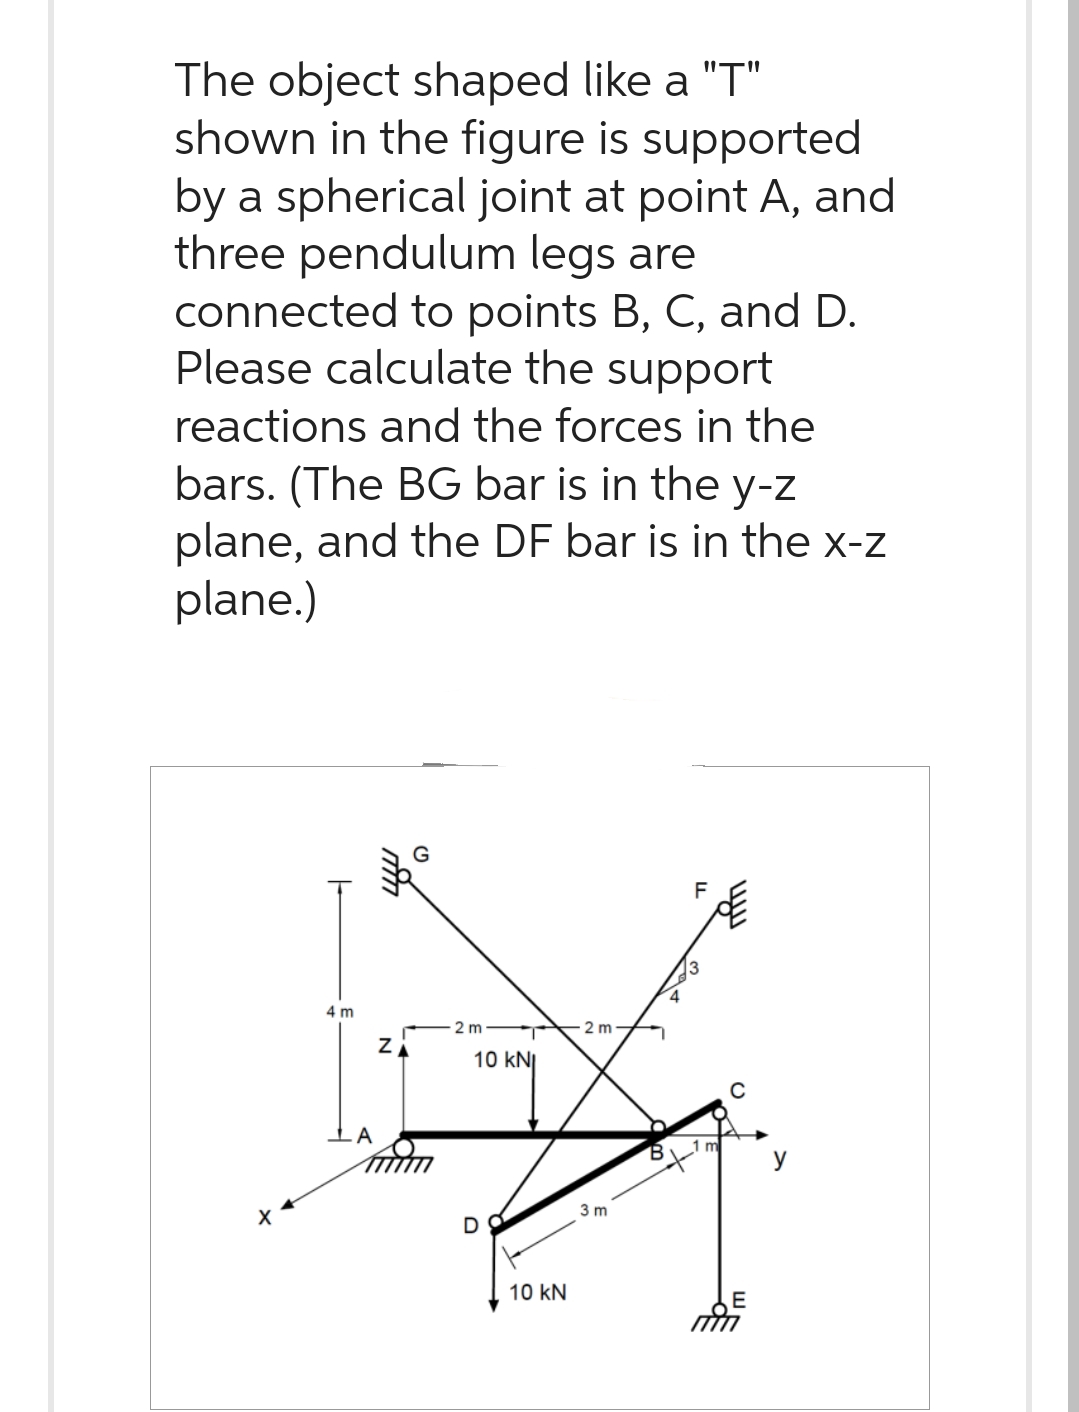 The object shaped like a "T"
shown in the figure is supported
by a spherical joint at point A, and
three pendulum legs are
connected to points B, C, and D.
Please calculate the support
reactions and the forces in the
bars. (The BG bar is in the y-z
plane, and the DF bar is in the x-z
plane.)
4 m
Z
2 m
10 KNI
D
10 kN
2 m
3 m
FL
y